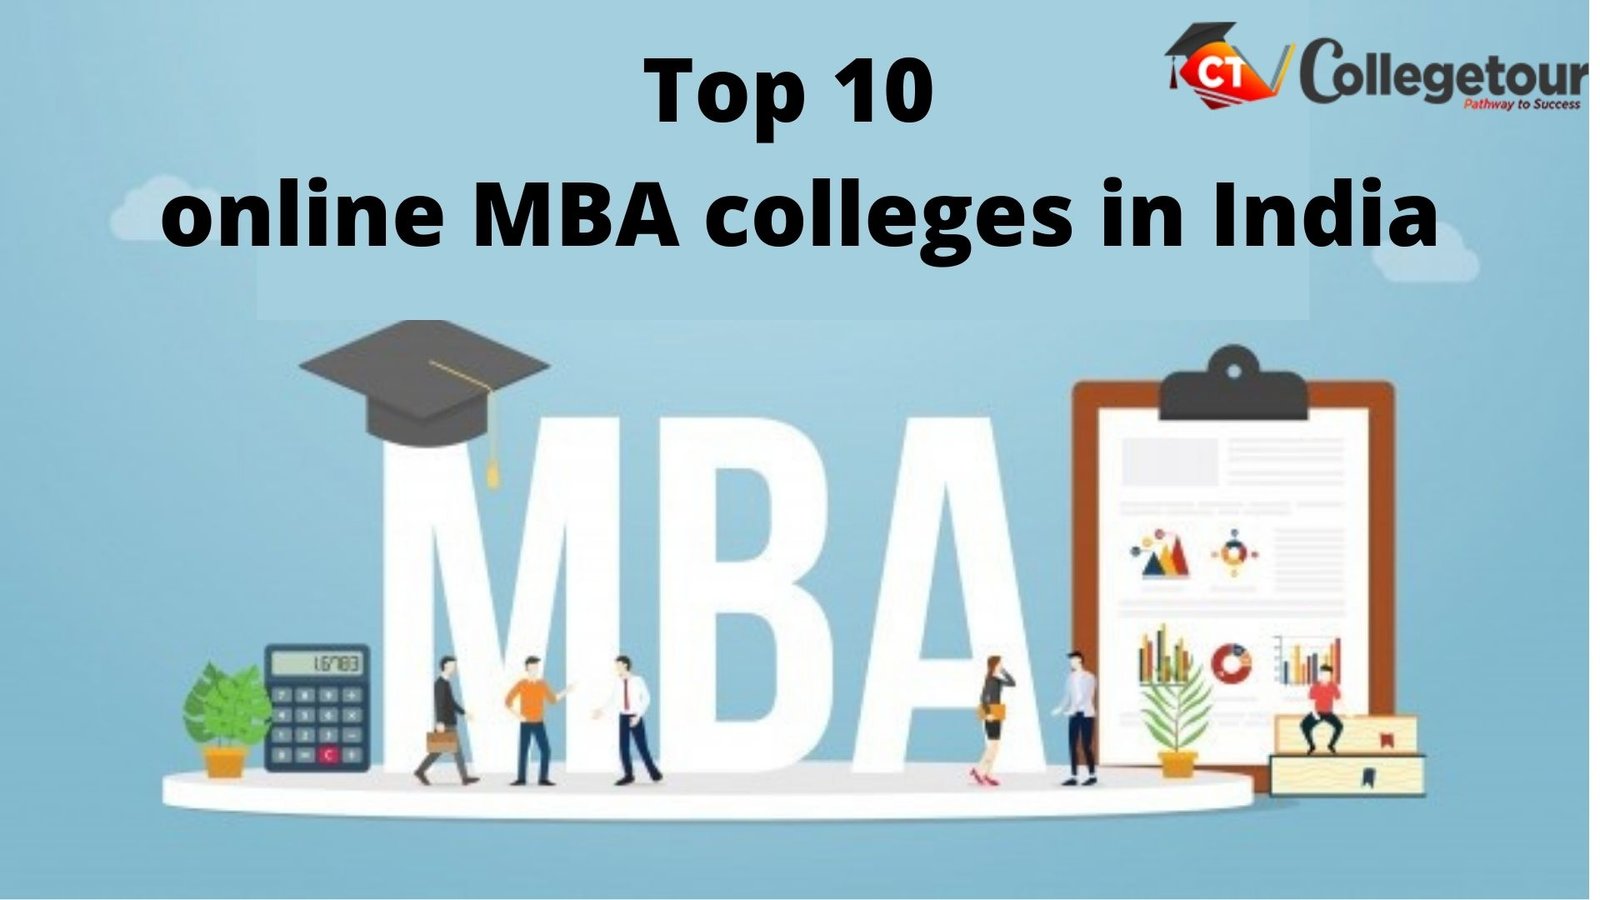 Top 10 online MBA colleges in India